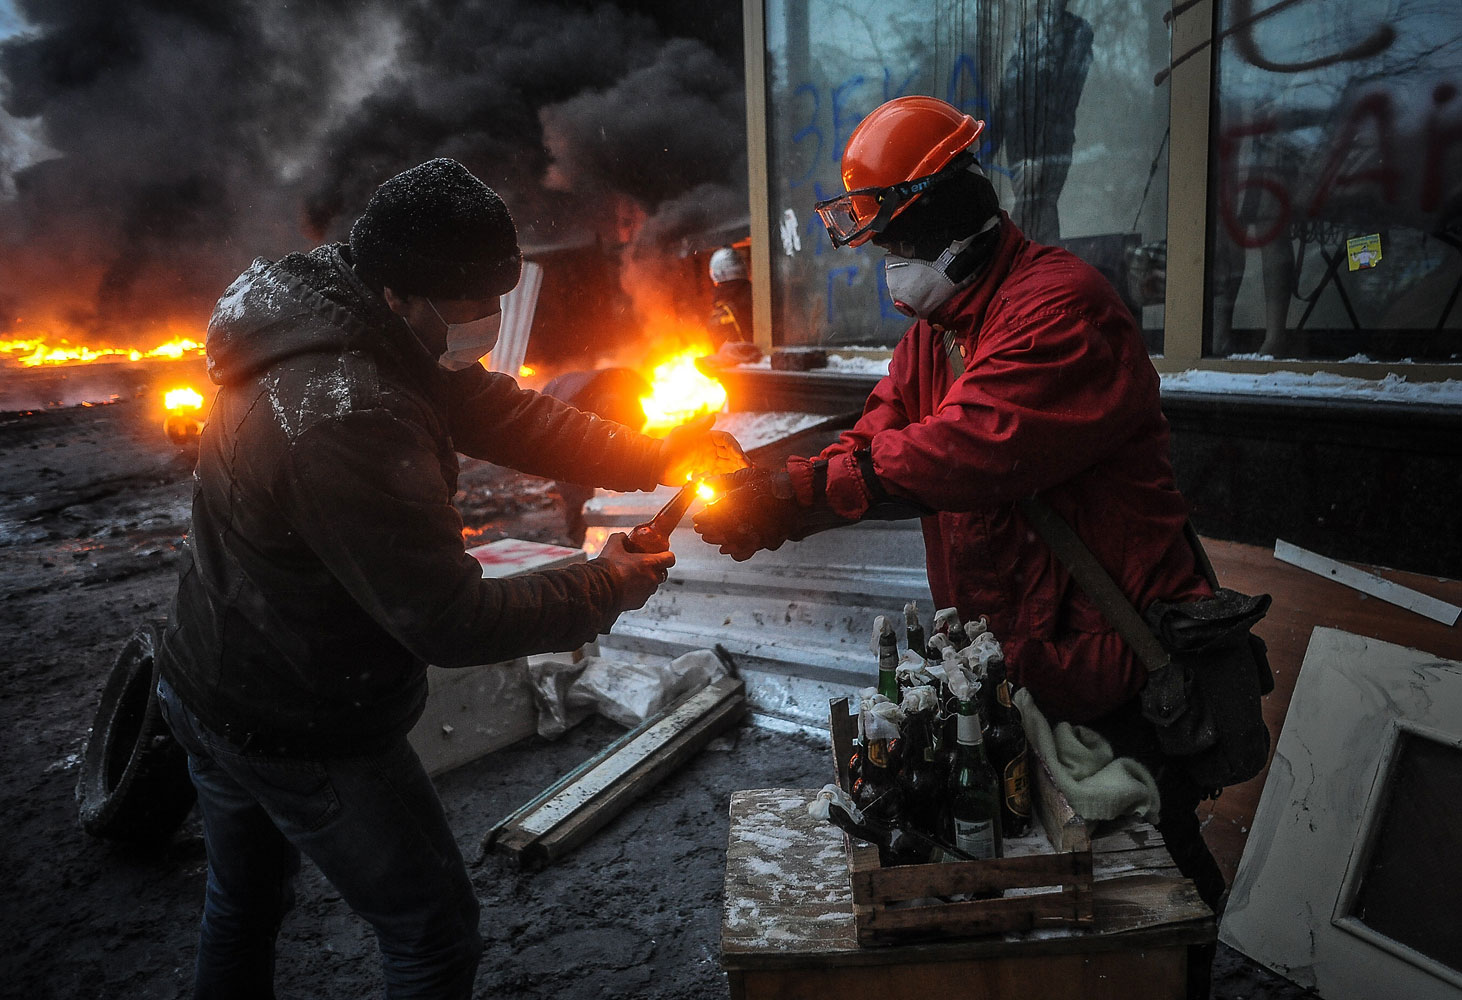 Pro-European protesters with a Molotov cocktail in Kiev, Jan. 22, 2014.